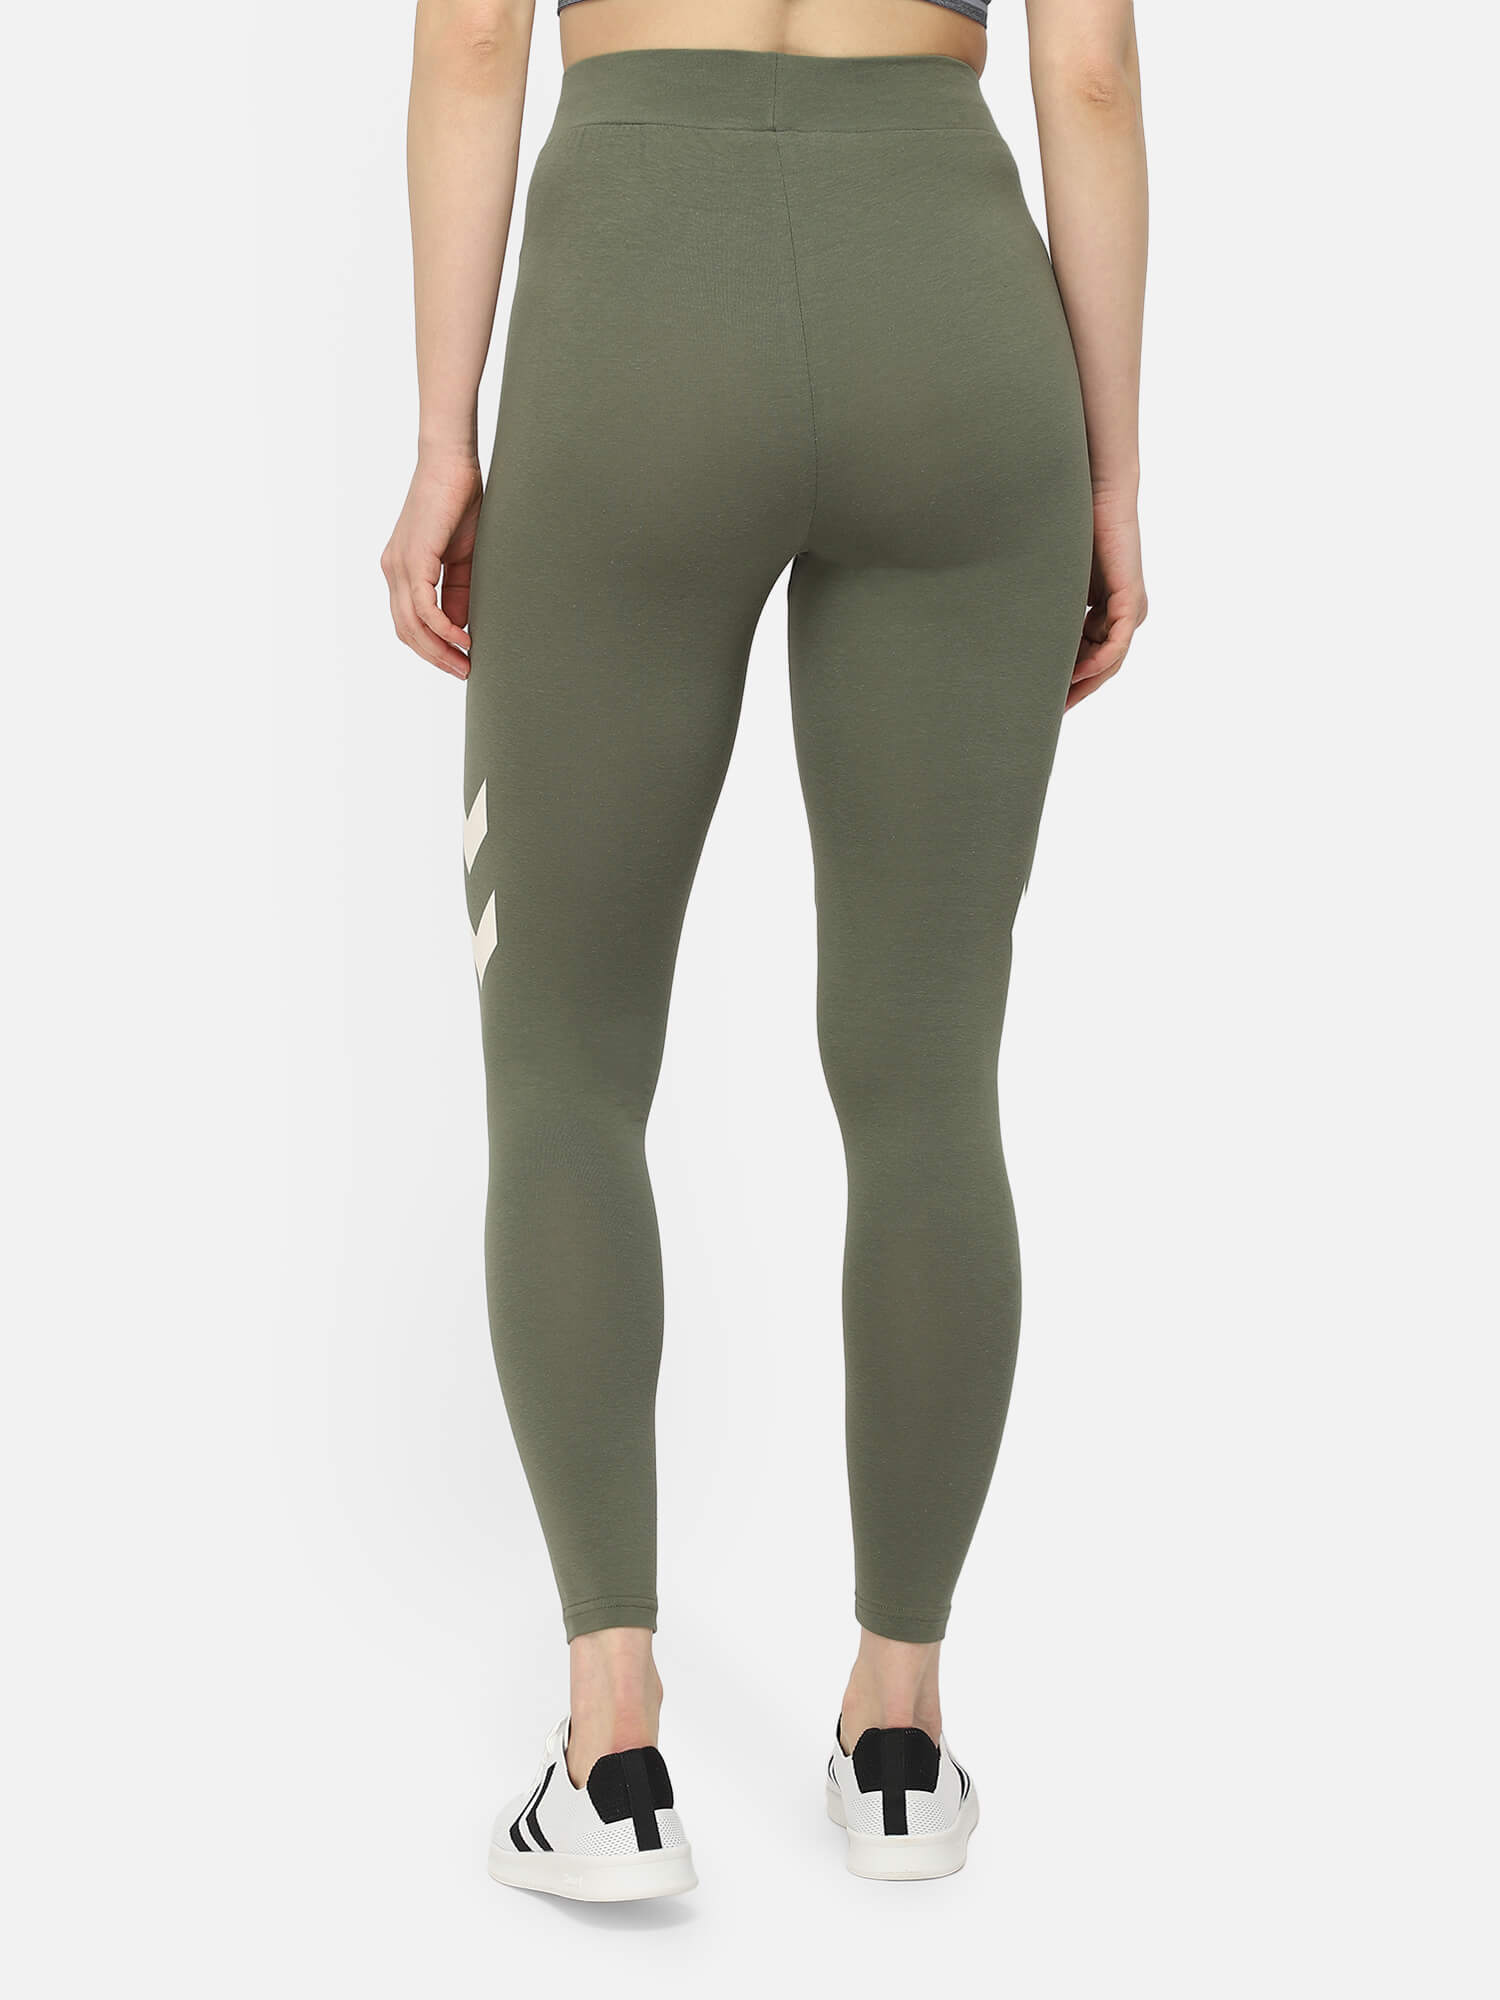 Legacy High Waist Green Tights for Women